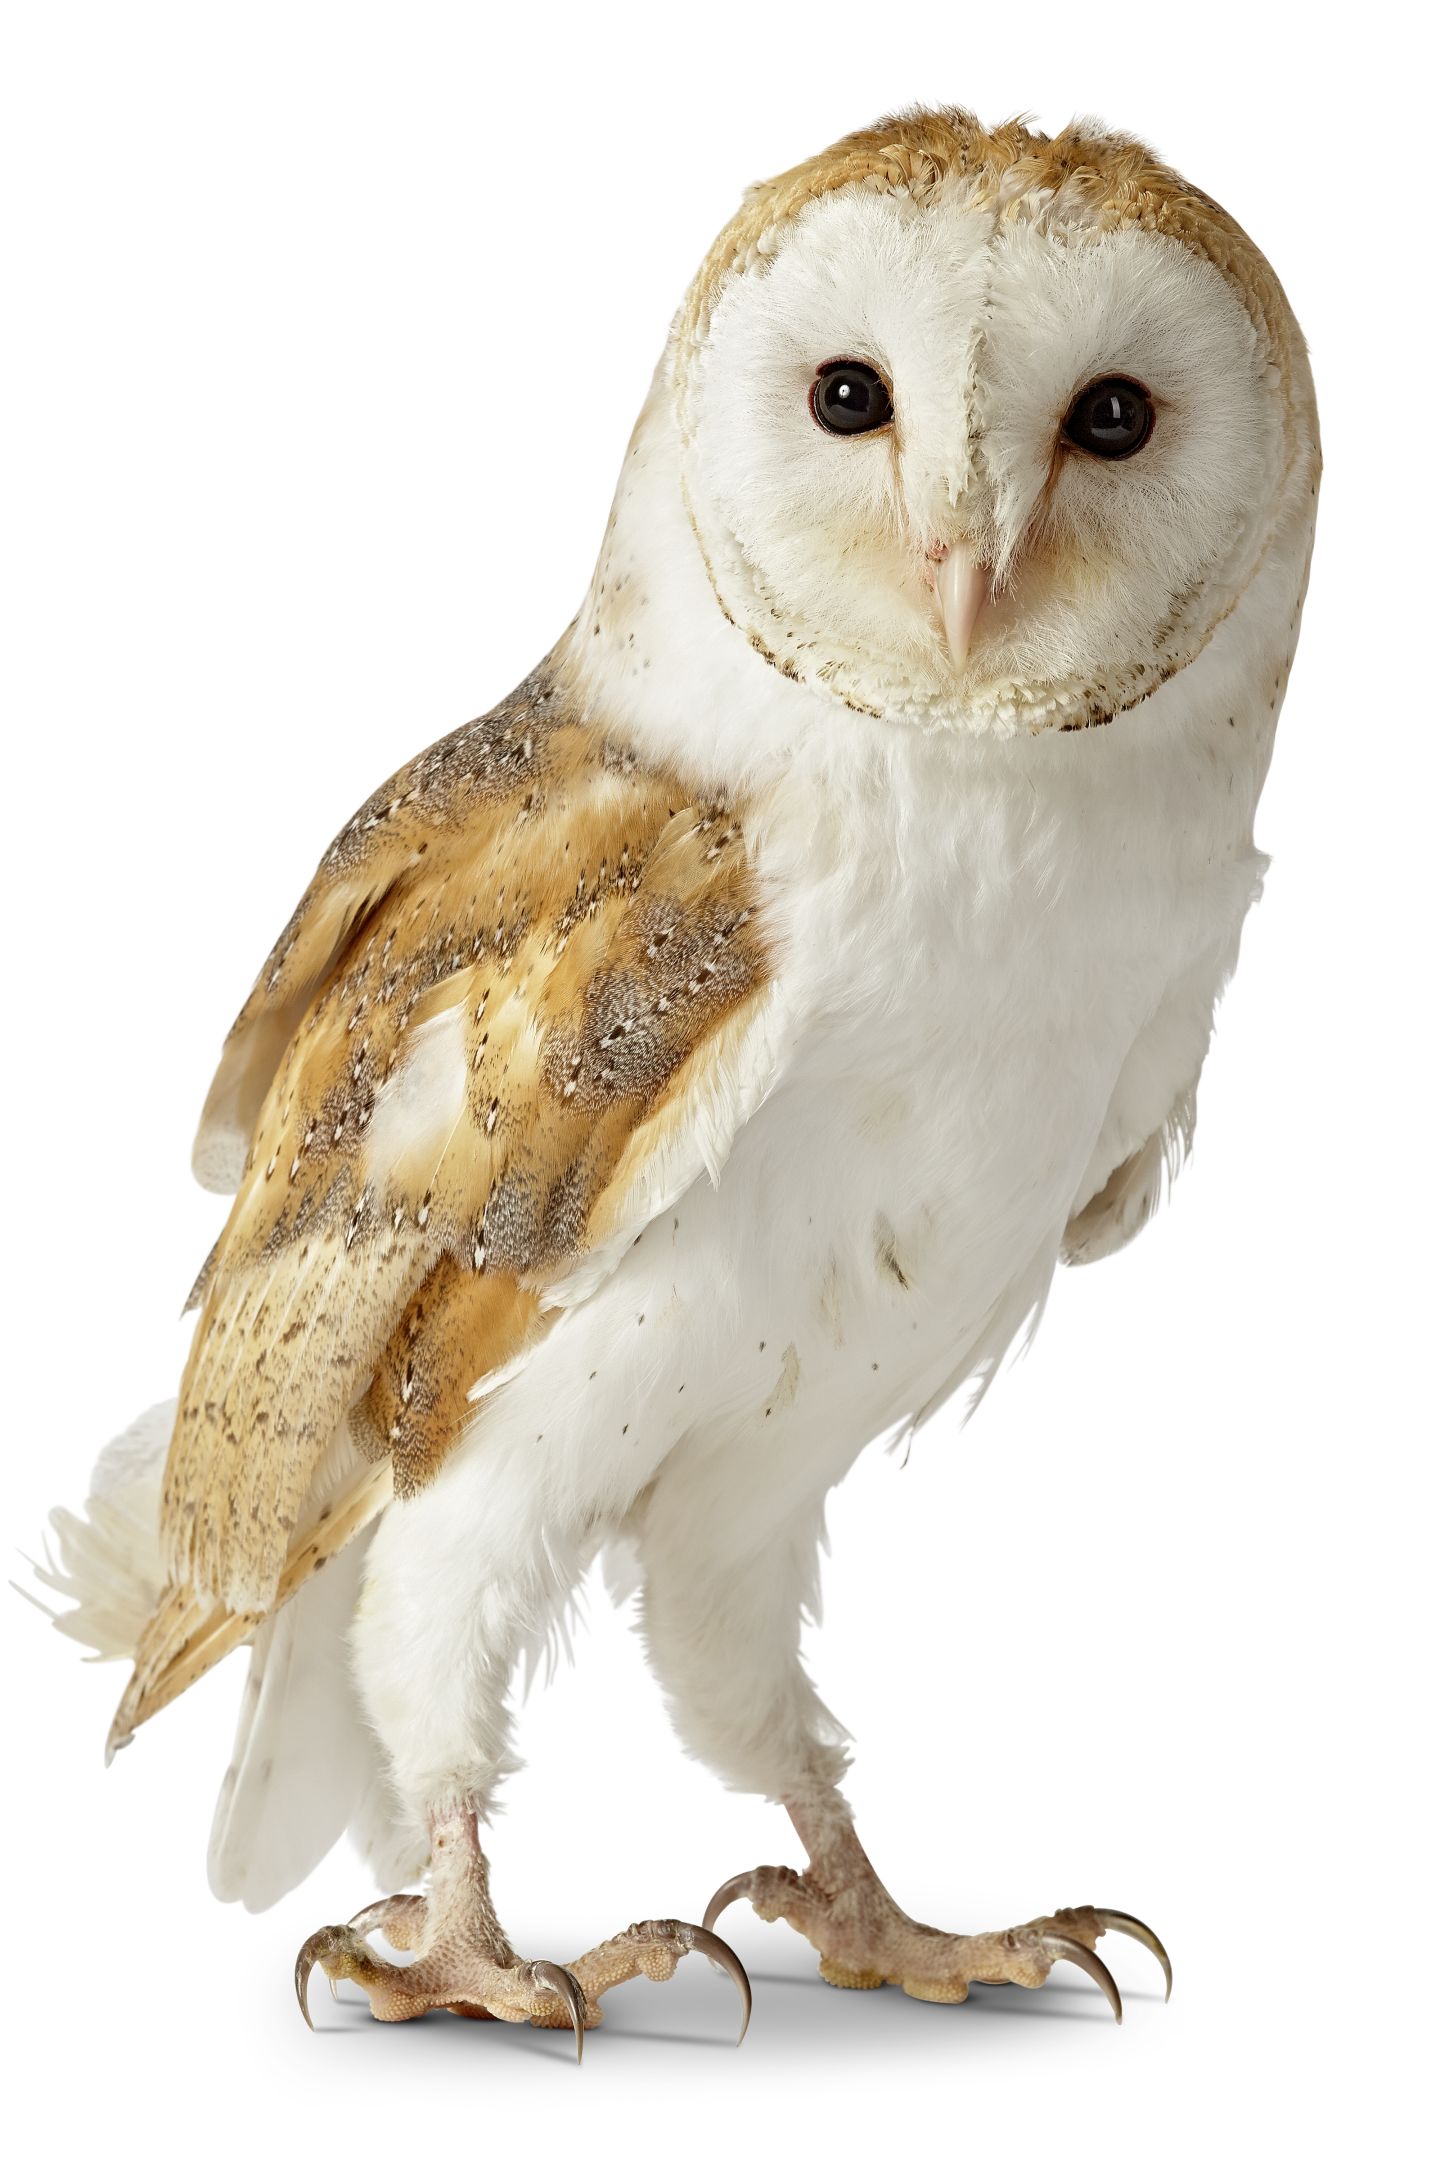 Owl Facts for Kids | Information About Owls | DK Find Out